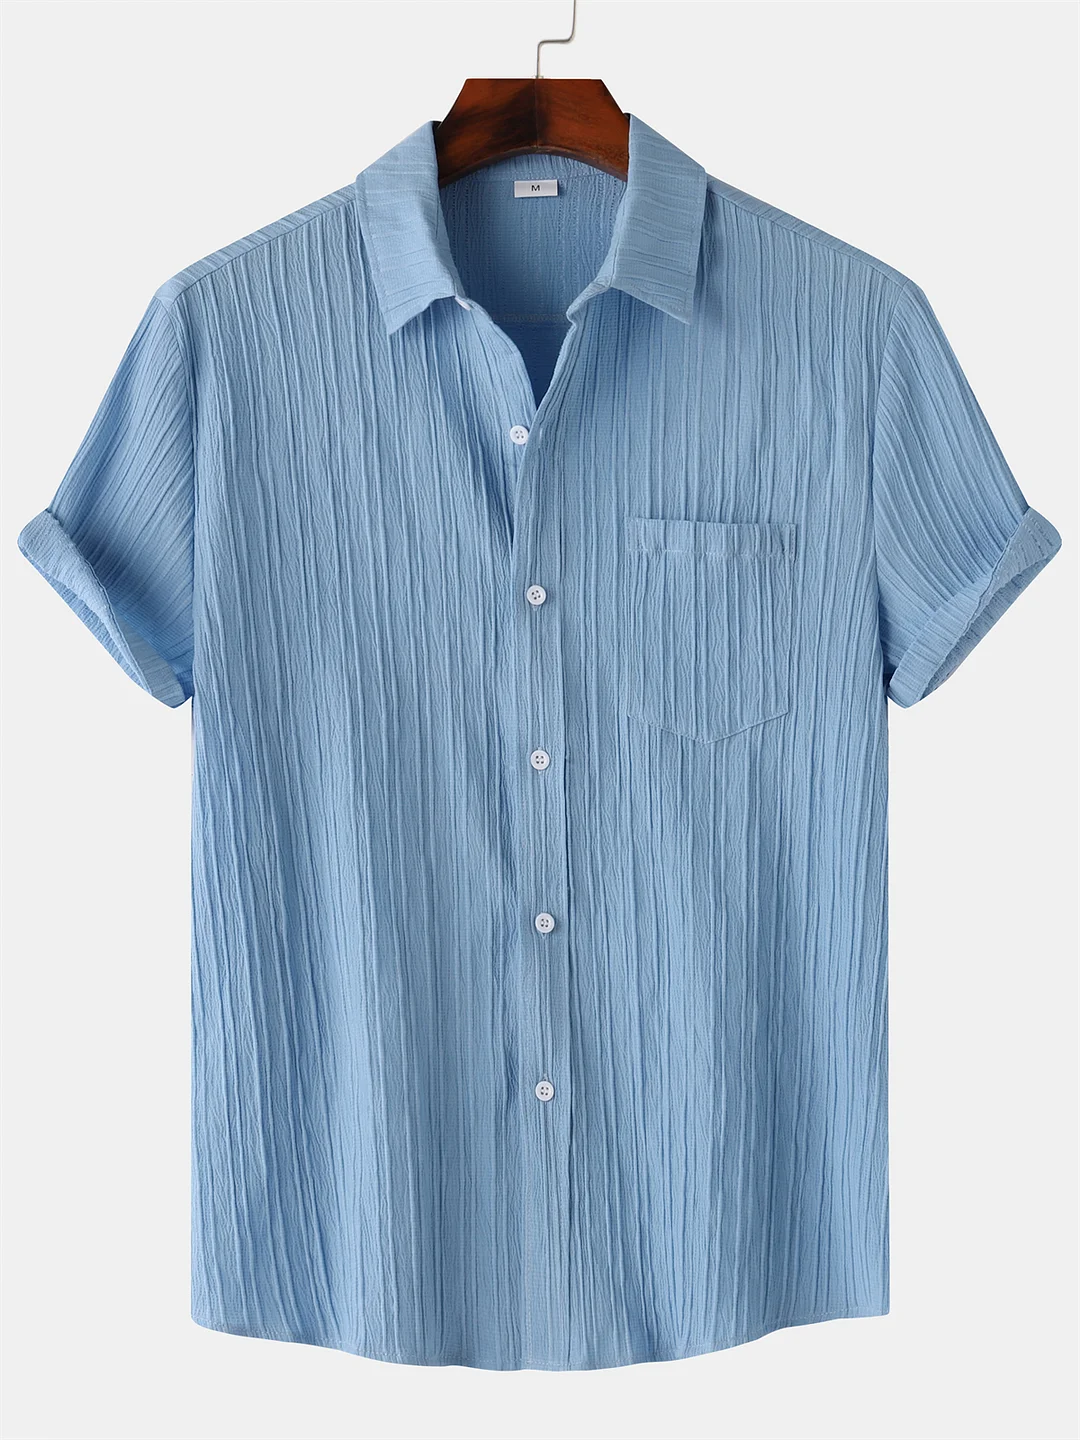 Suitmens Men's Striped Texture Cotton And Linen Simple Casual Pocket Short-sleeved Shirt